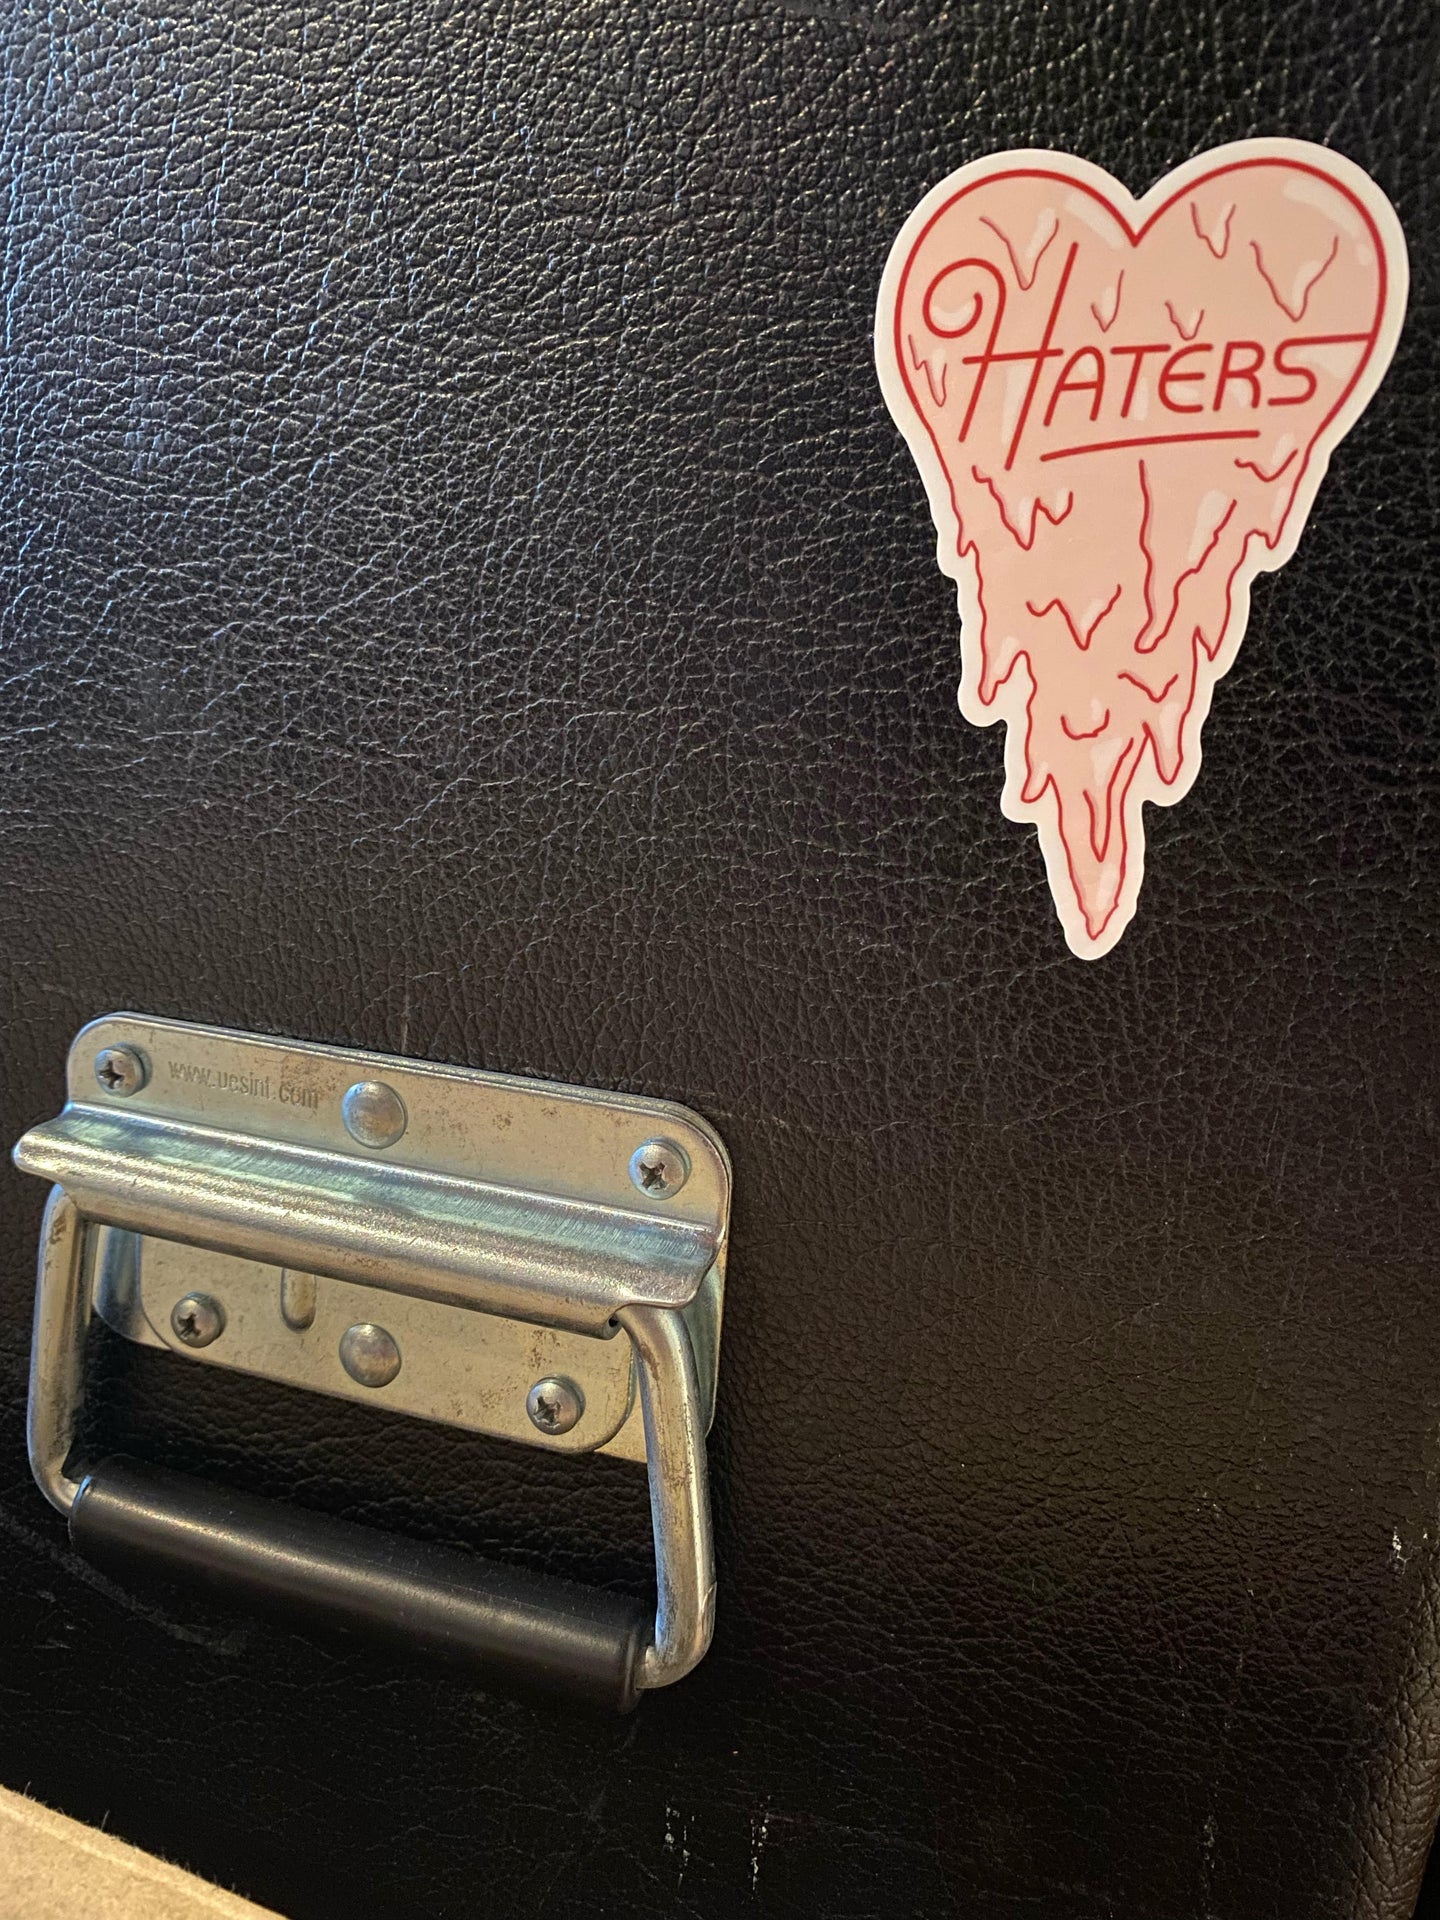 Haters Melting Sticker